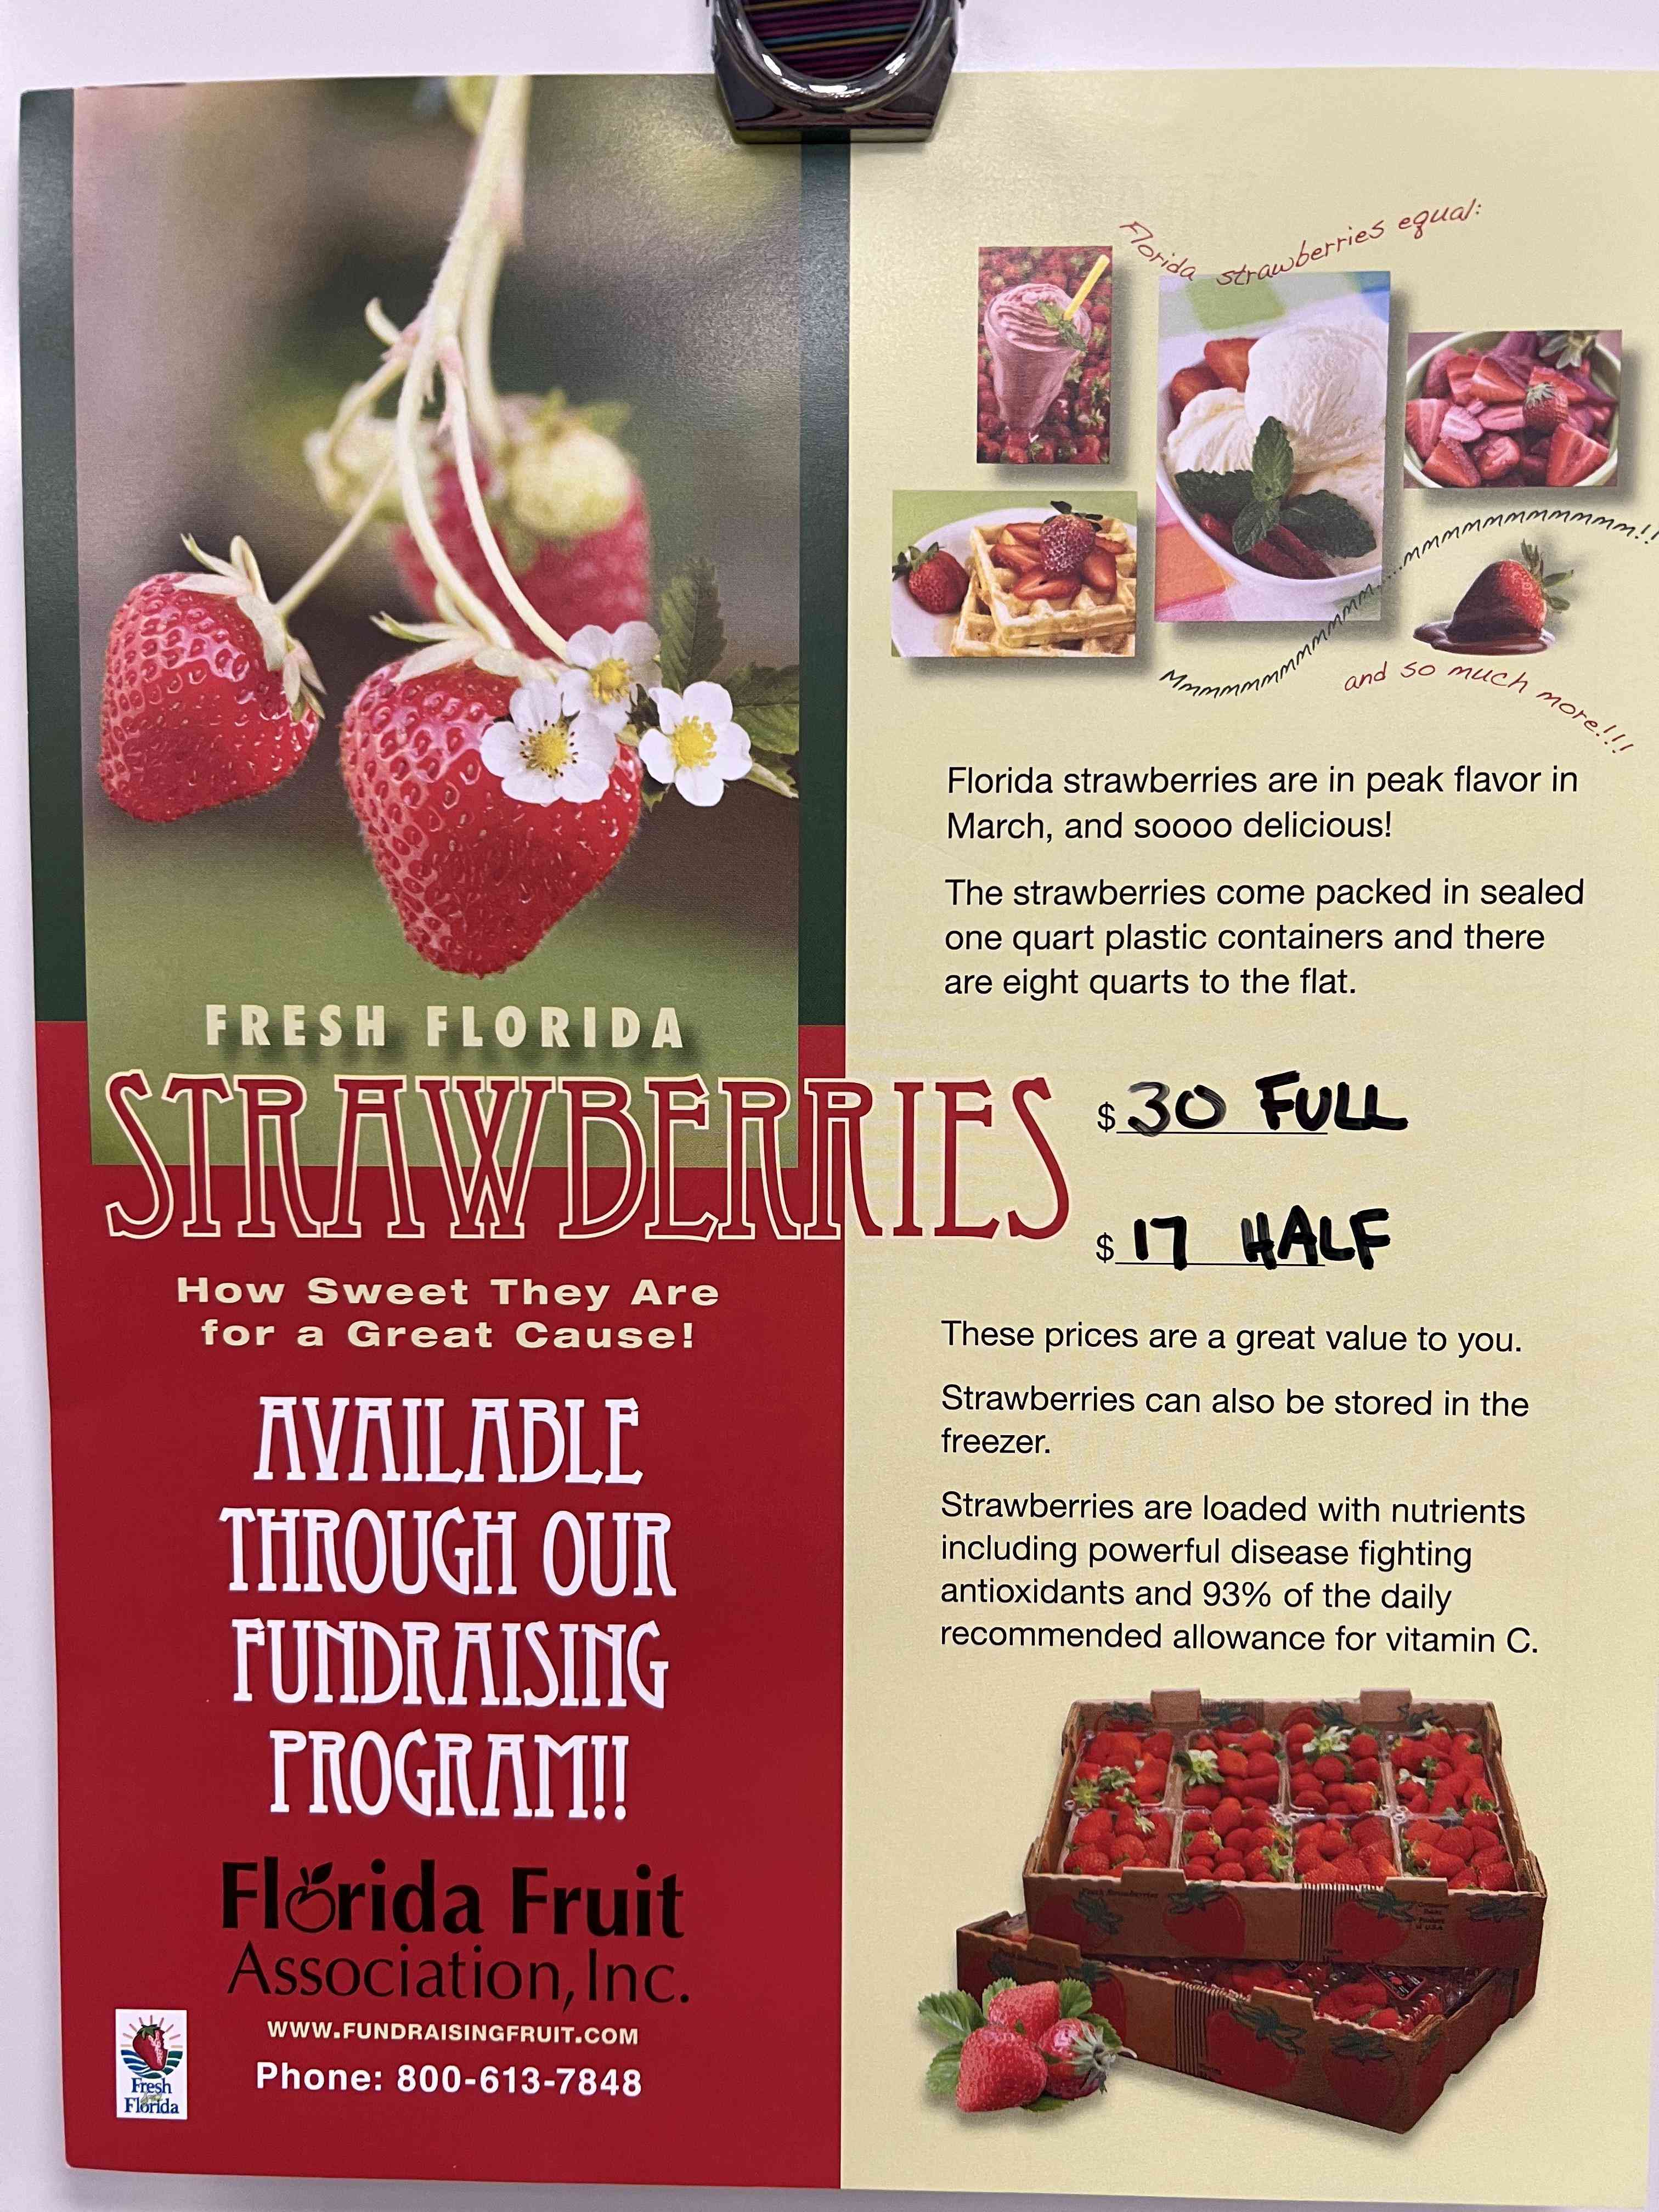 Strawberry Sale!  Student Summer Research Trip Image